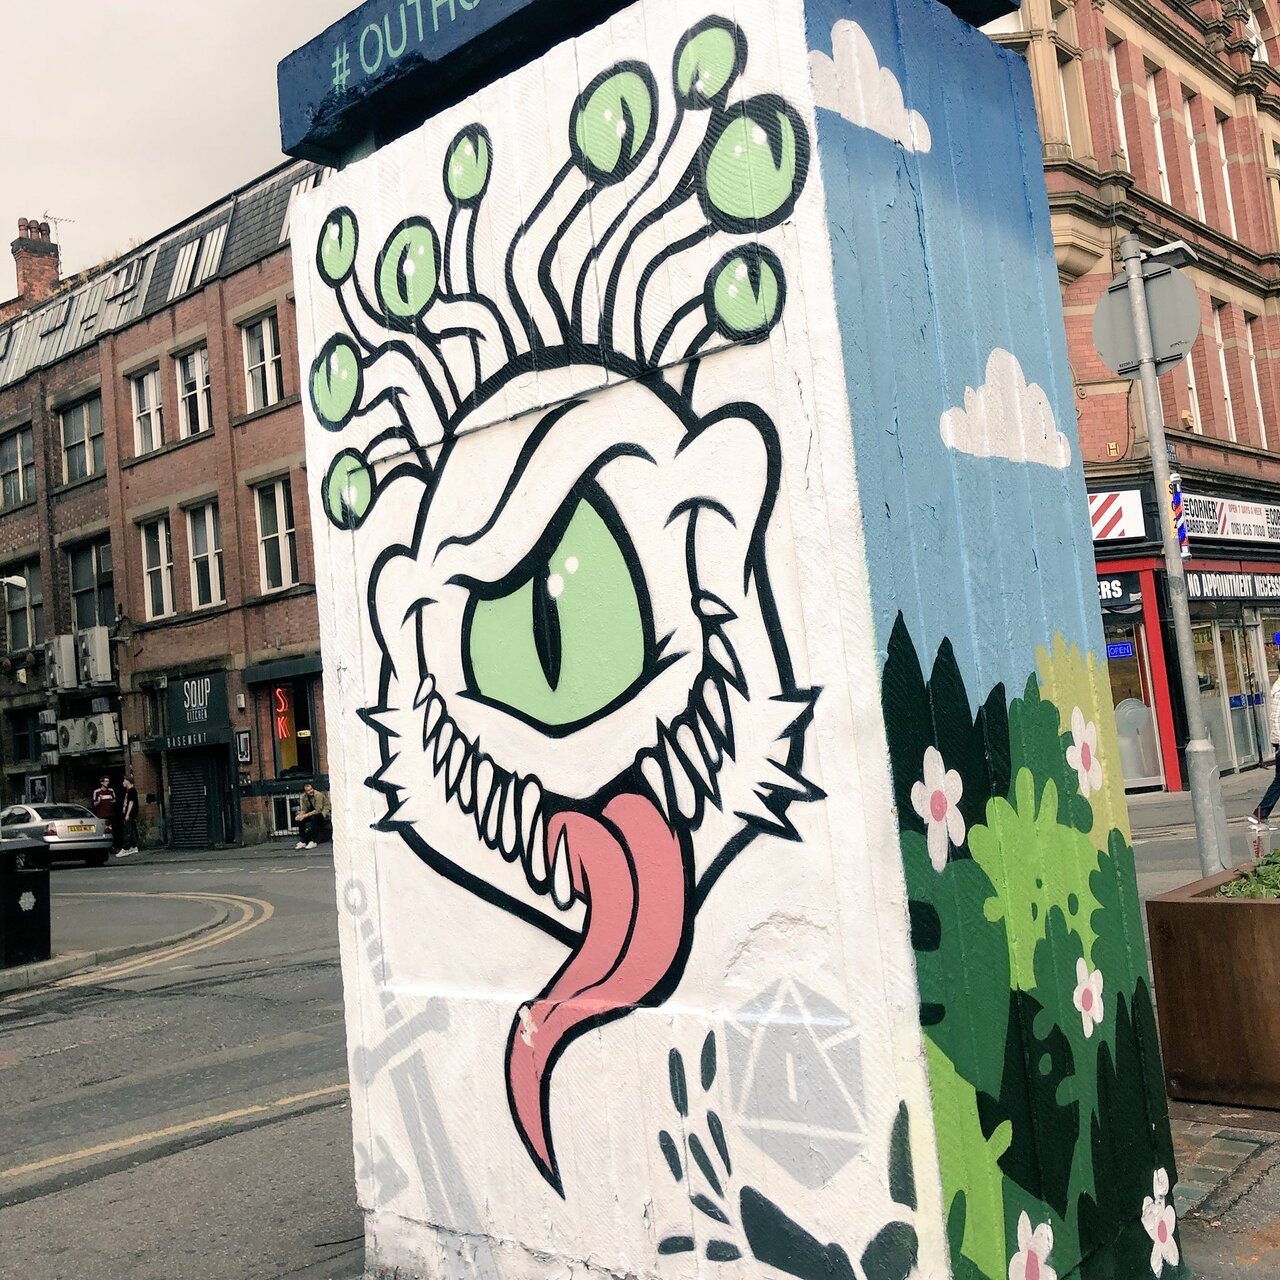 Beholders about town! #Manchester shows its geeky face and it is beautiful! #dnd #community #art #graffiti https://t.co/WLrzSWEbmZ